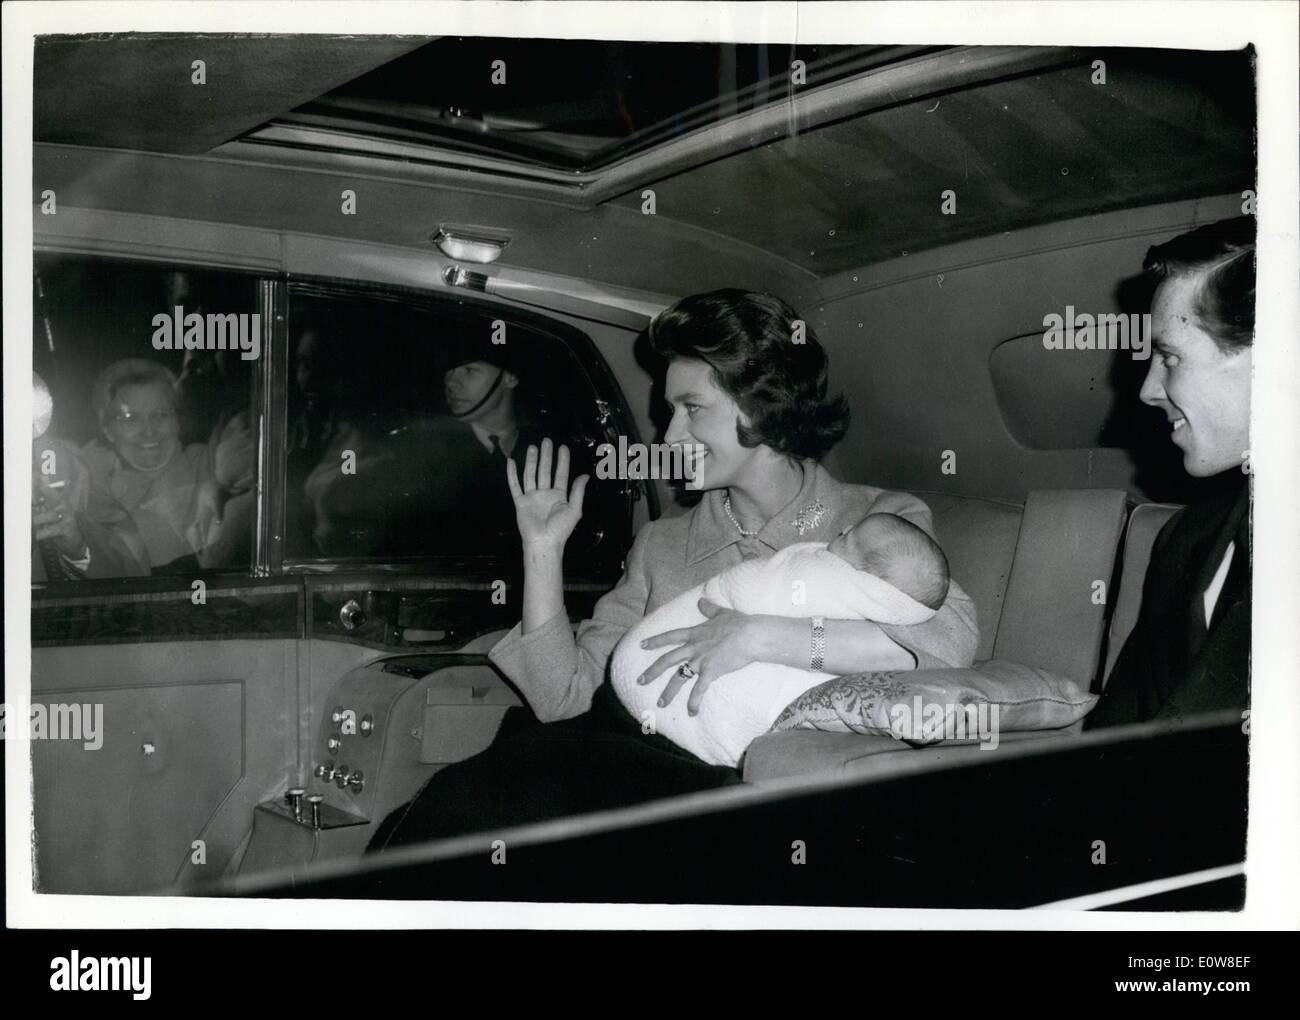 Nov. 11, 1961 - Princess Margaret and Baby Go Home to Kensington Palace this afternoon: Princess Margaret and her 27-day-old son viscount Linley, returned home to Kensington Palace this afternoon. She had moved into Clarence House the night before the Royal baby was born. Photo shows Princess Margaret, holding Viscount Linley, with the earl of Snowdon leaving Clarence House by car this afternoon. Stock Photo